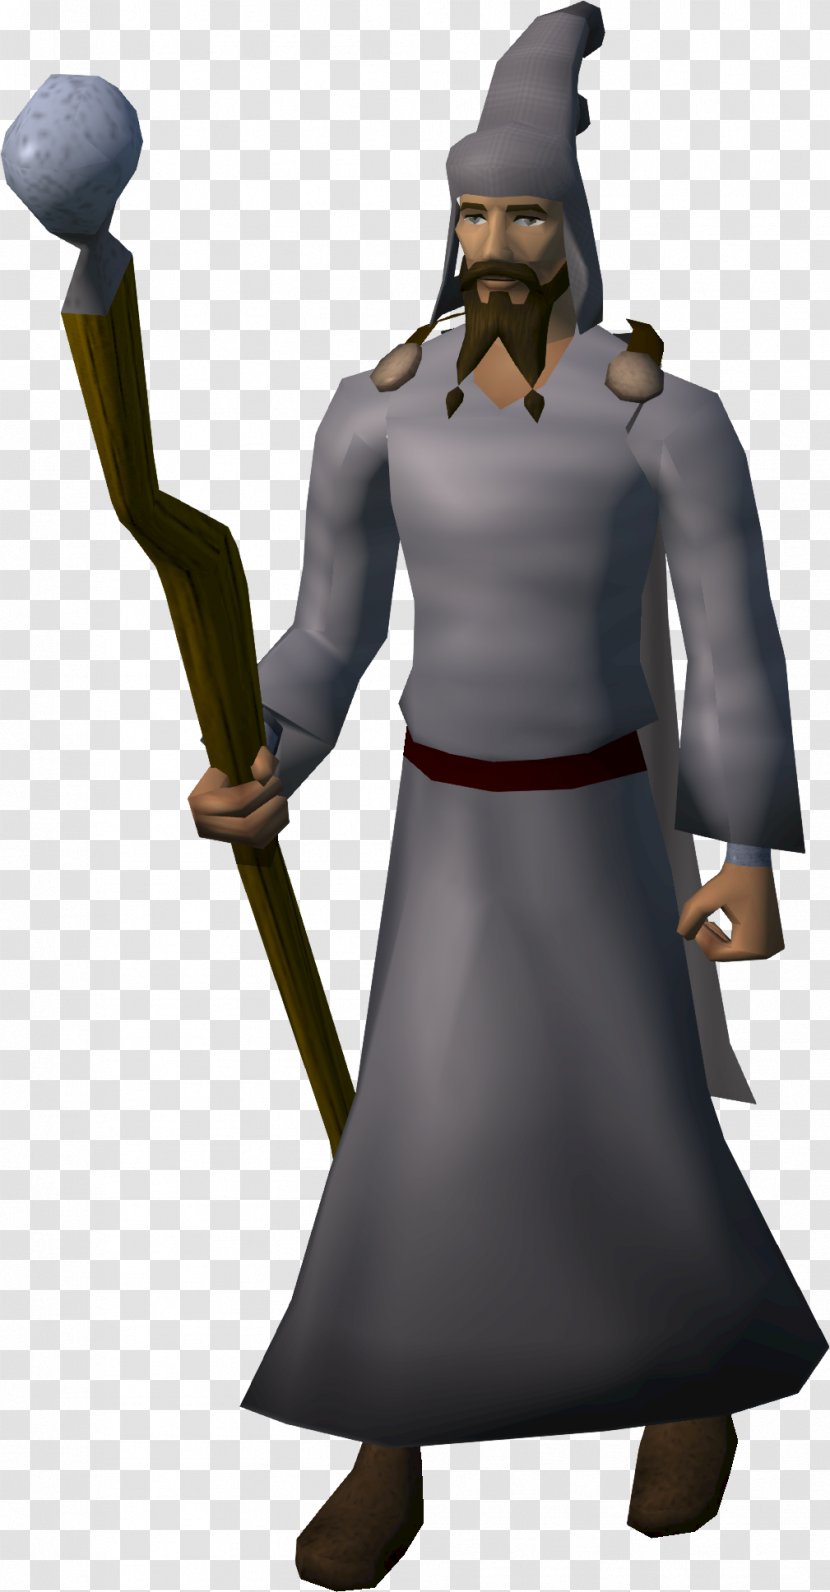 Old School RuneScape Wizard - Male - File Transparent PNG